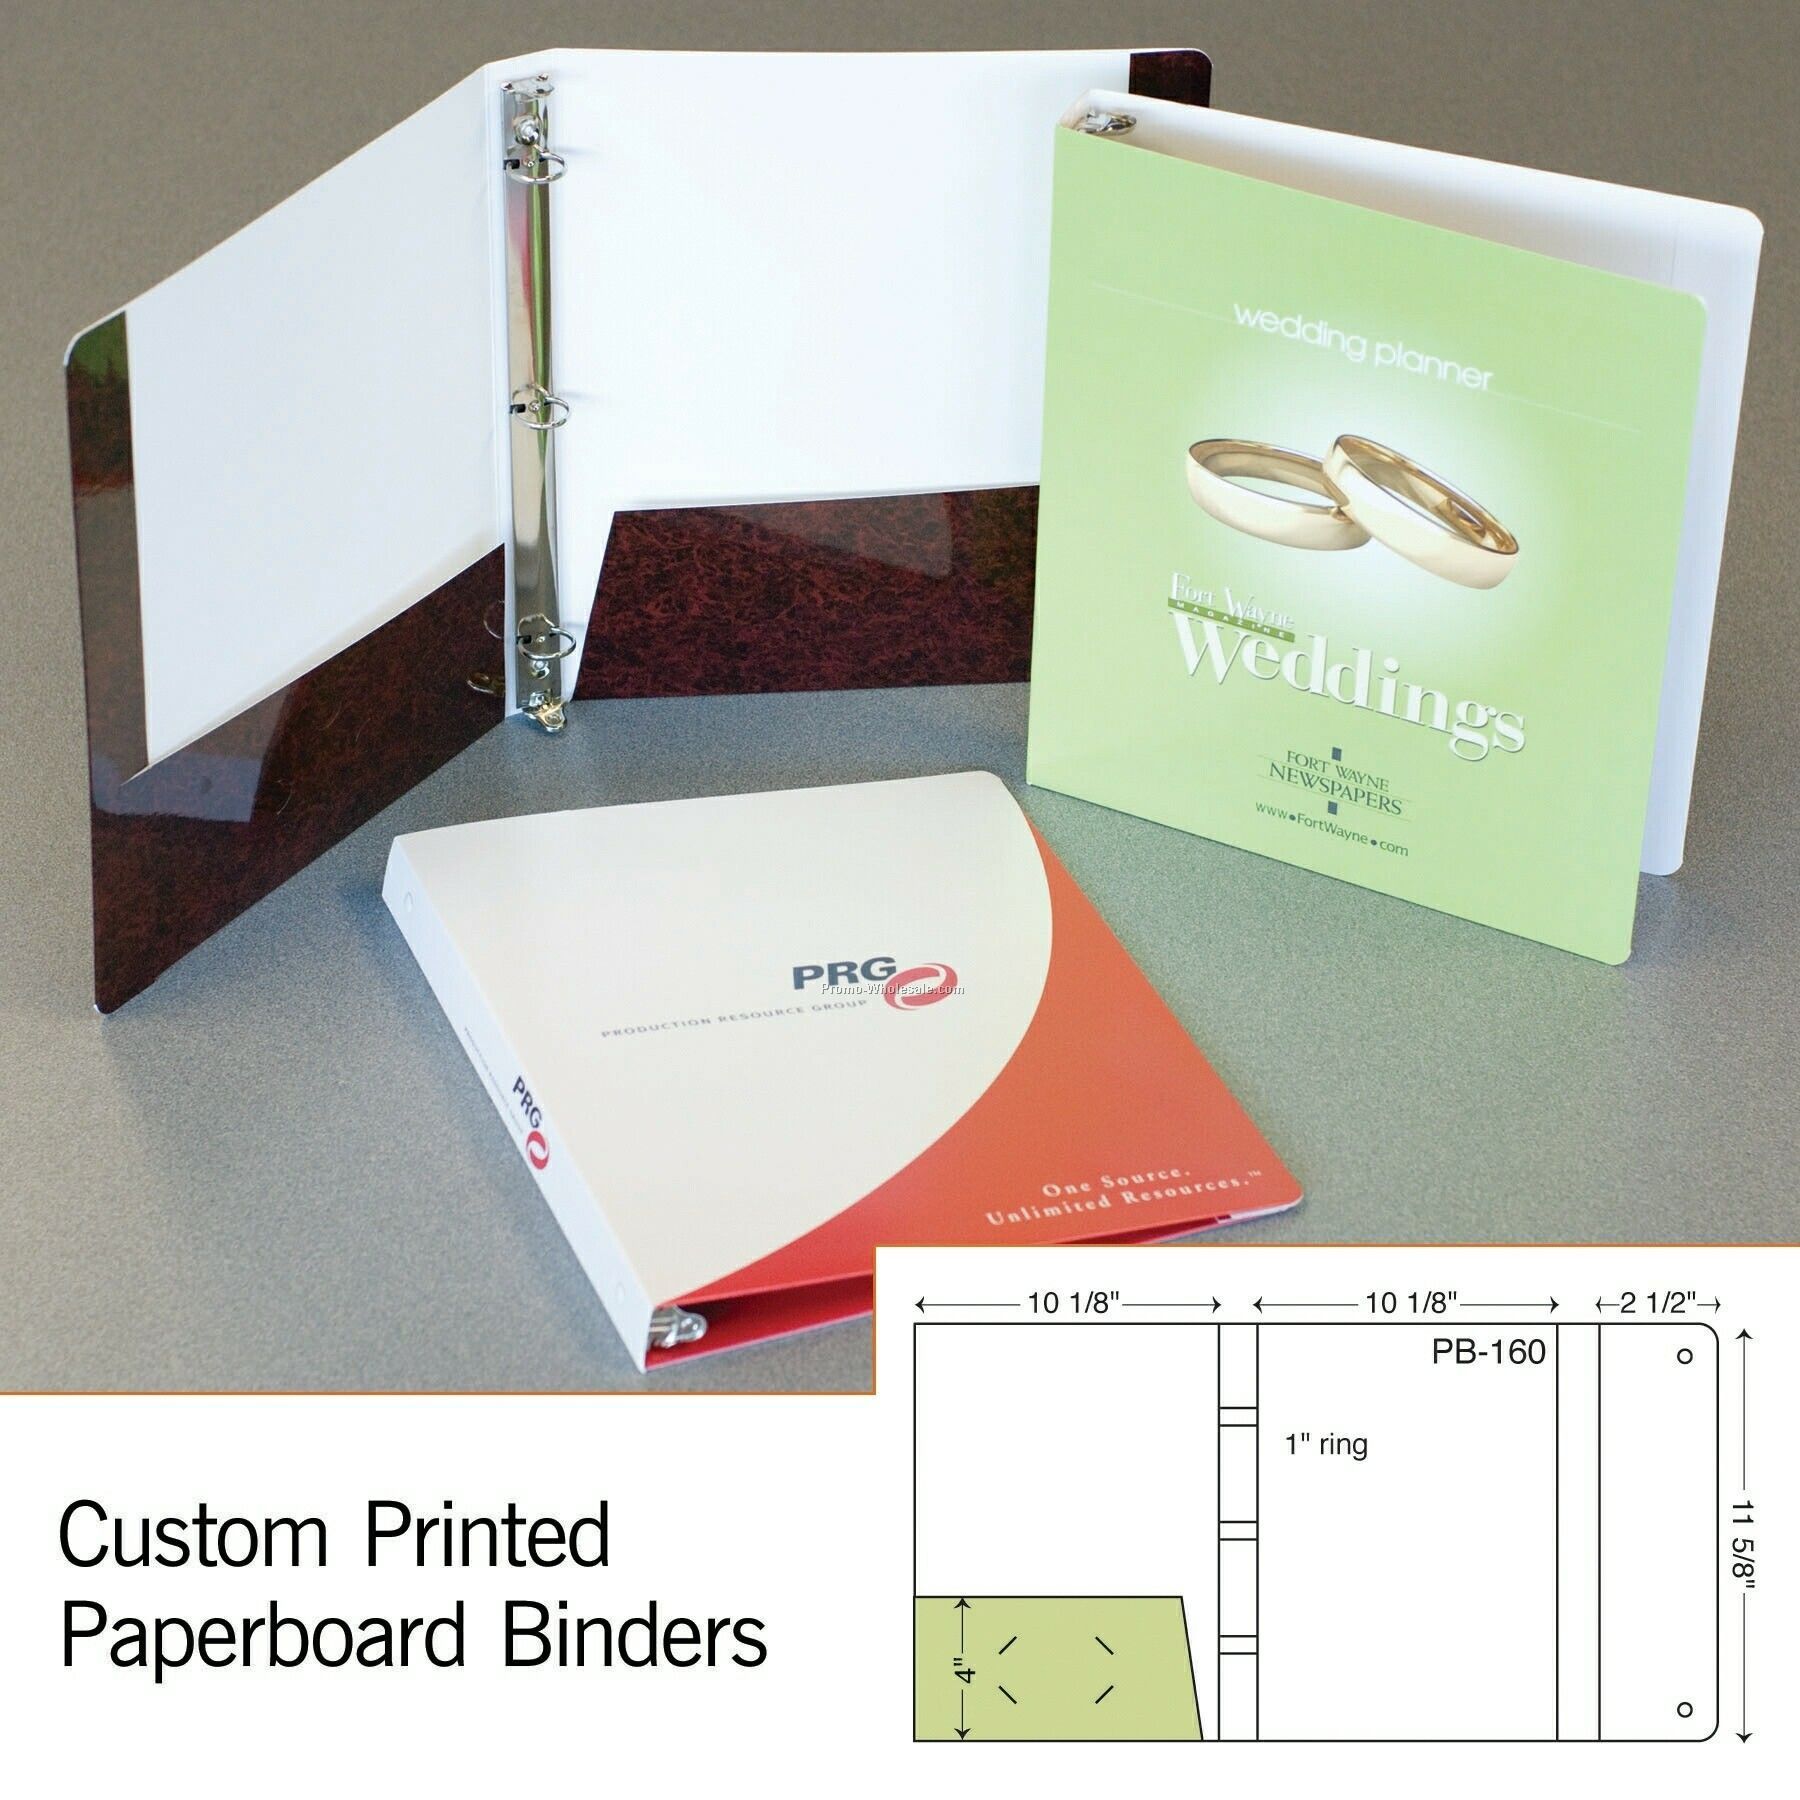 11-5/8"x9-3/4" Laminated 3-ring Binder W/ Reinforced Side (4 Color Process)